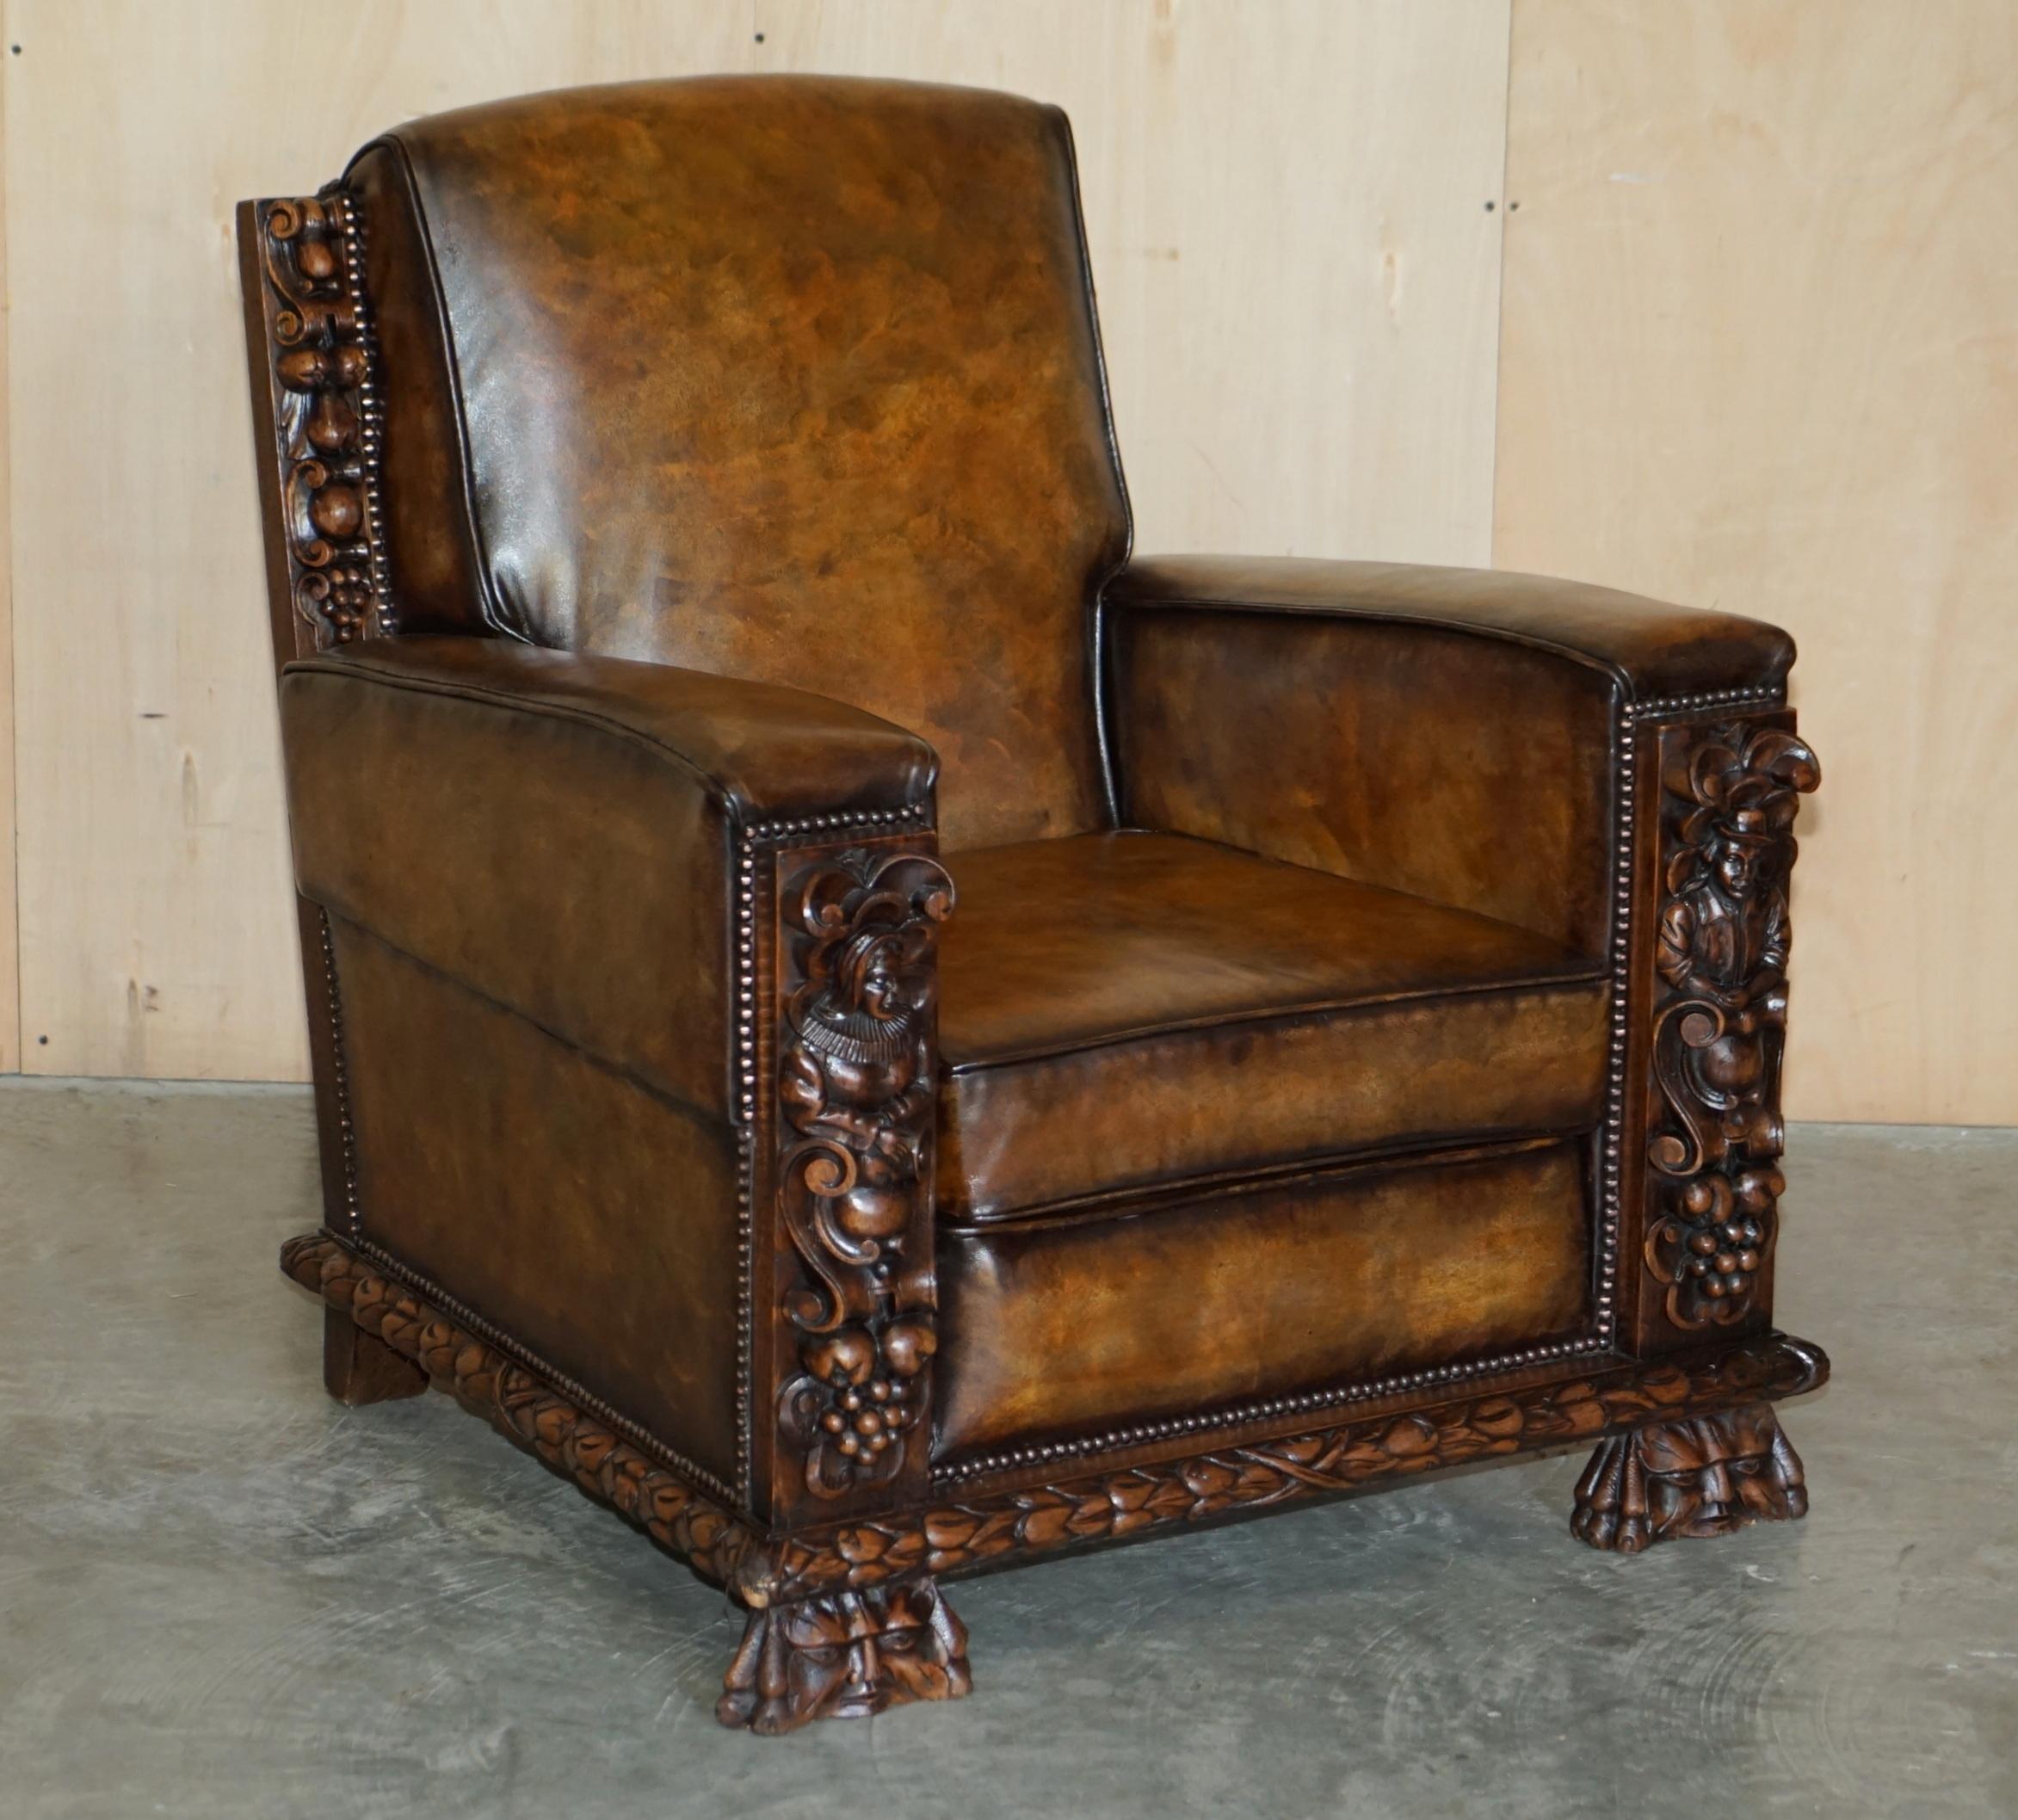 We are delighted to offer for sale this stunning fully restored pair of antique hand dyed Cigar brown leather club armchairs with Gothic carved panels.

An exceptionally good looking well-made and comfortable pair of armchairs, I have four of